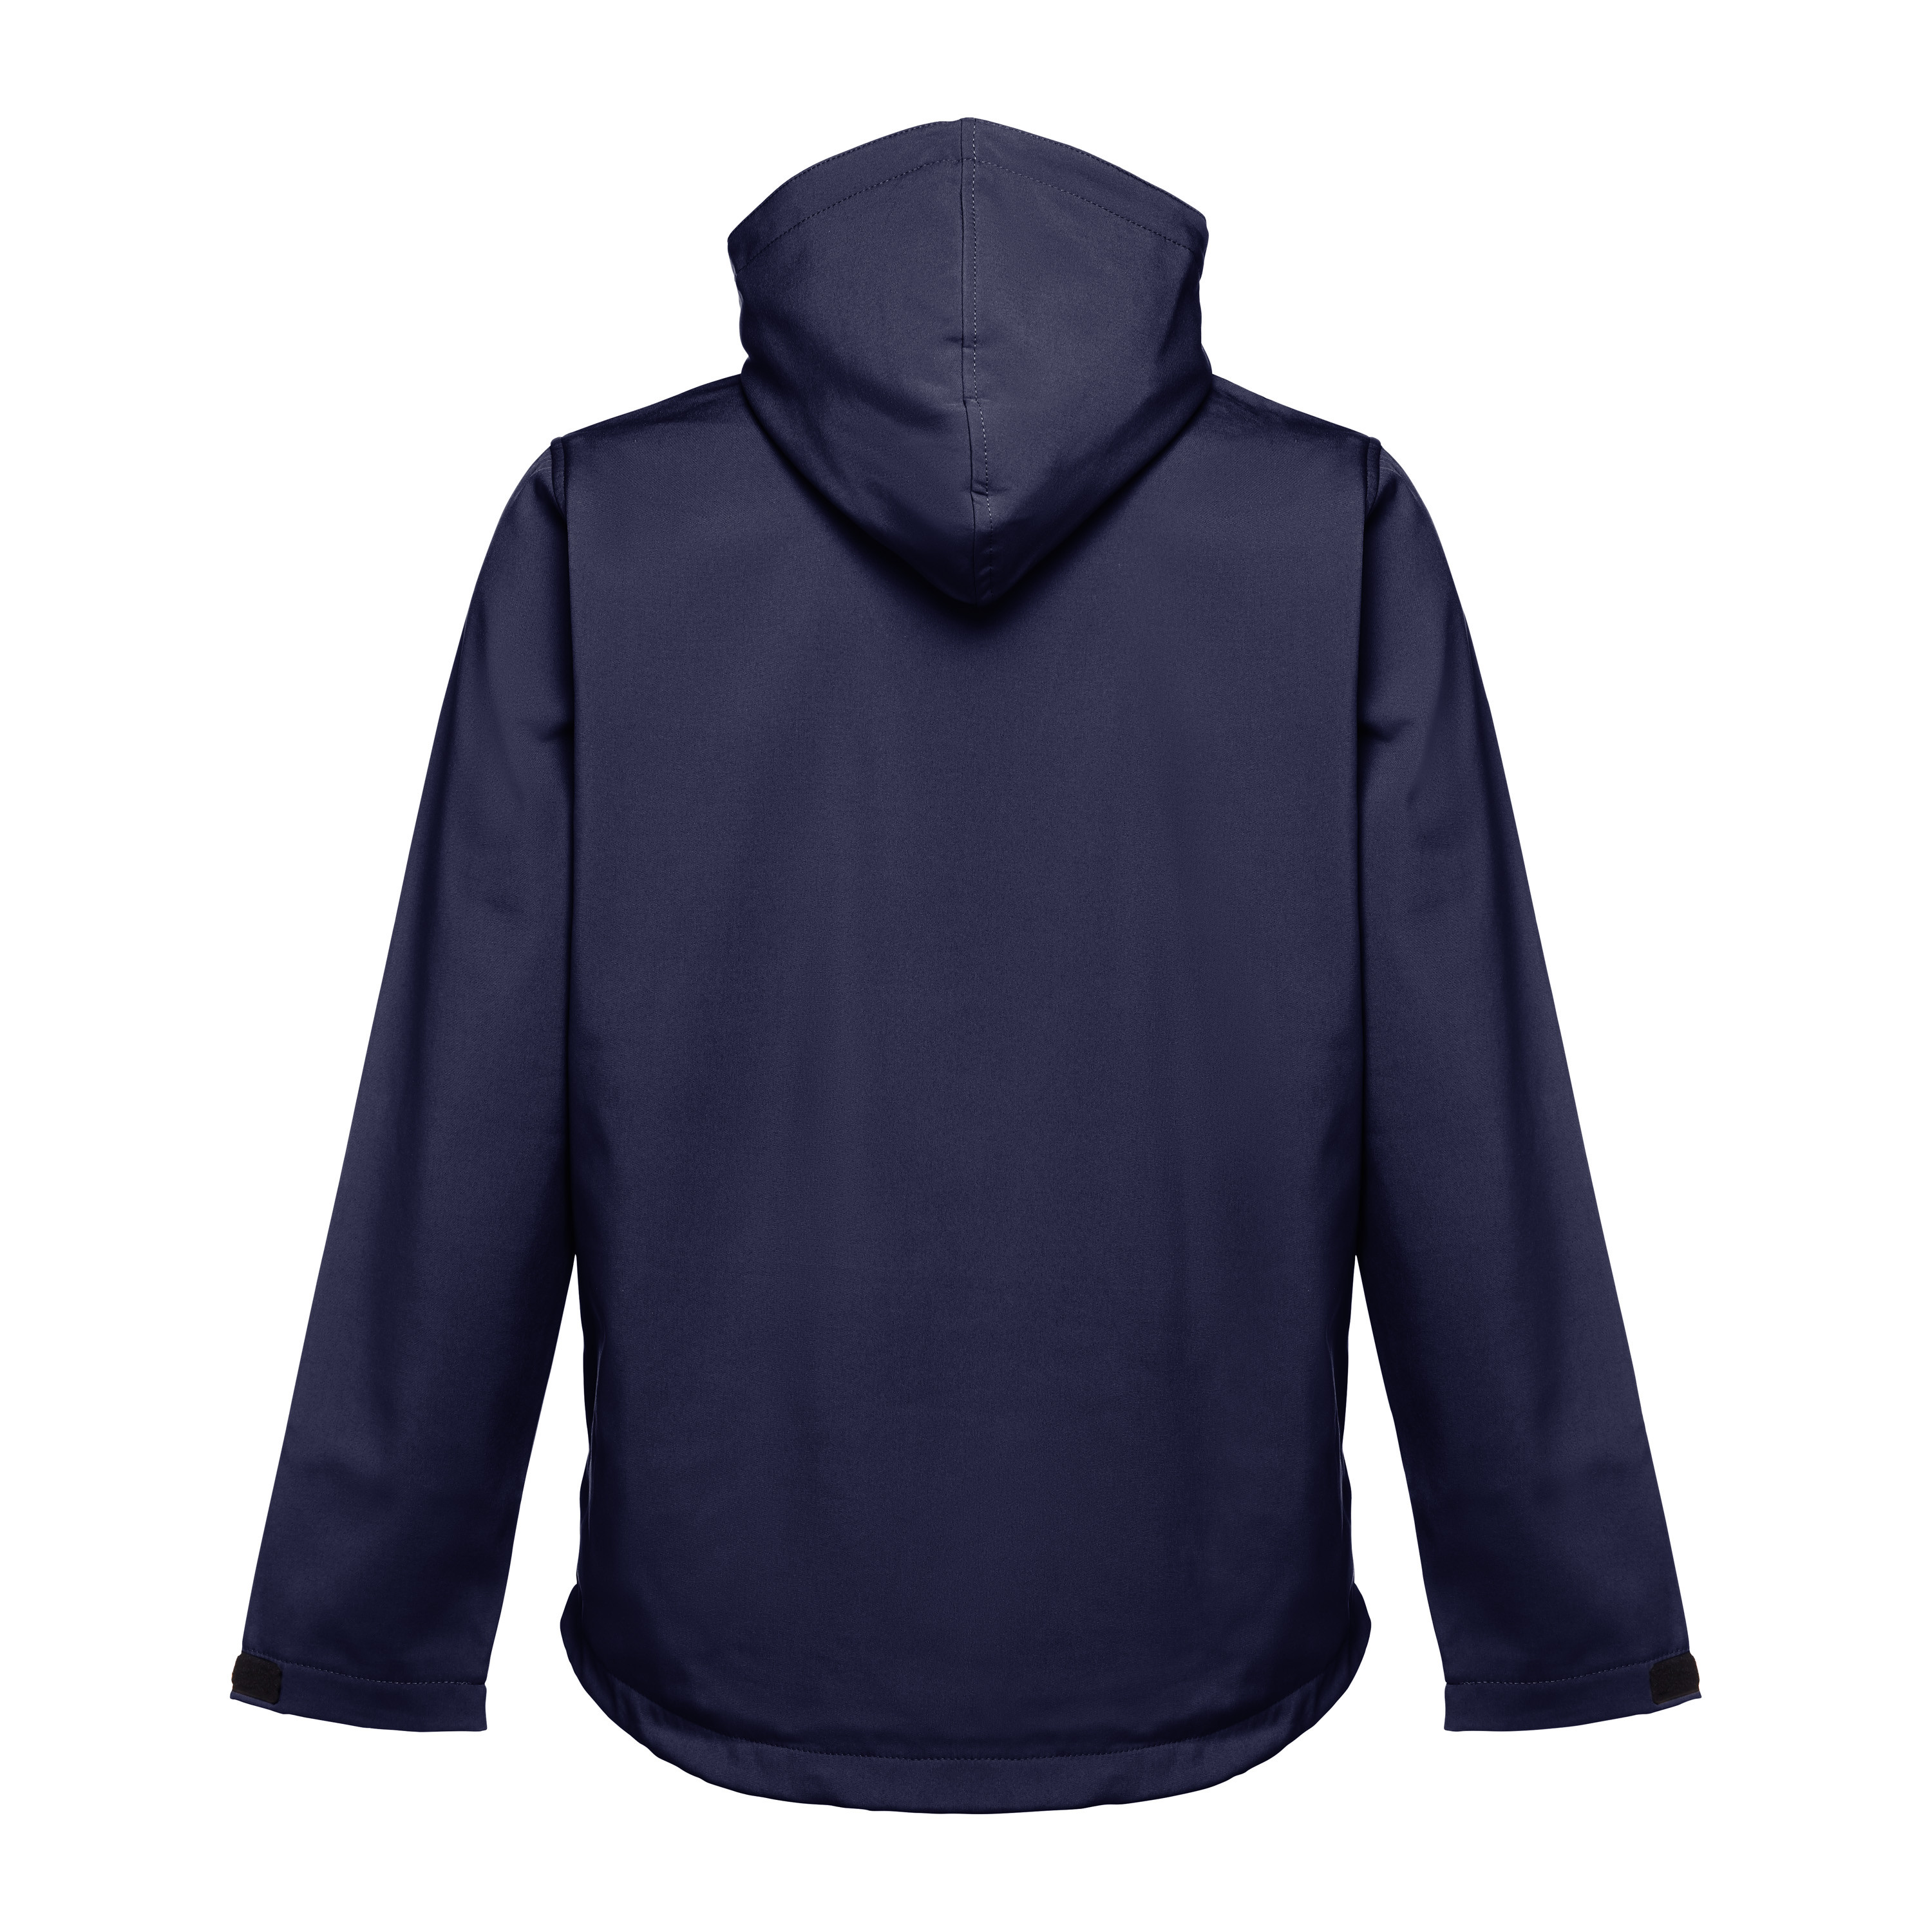 THC Zagreb-Men's softshell with removable hood 280g